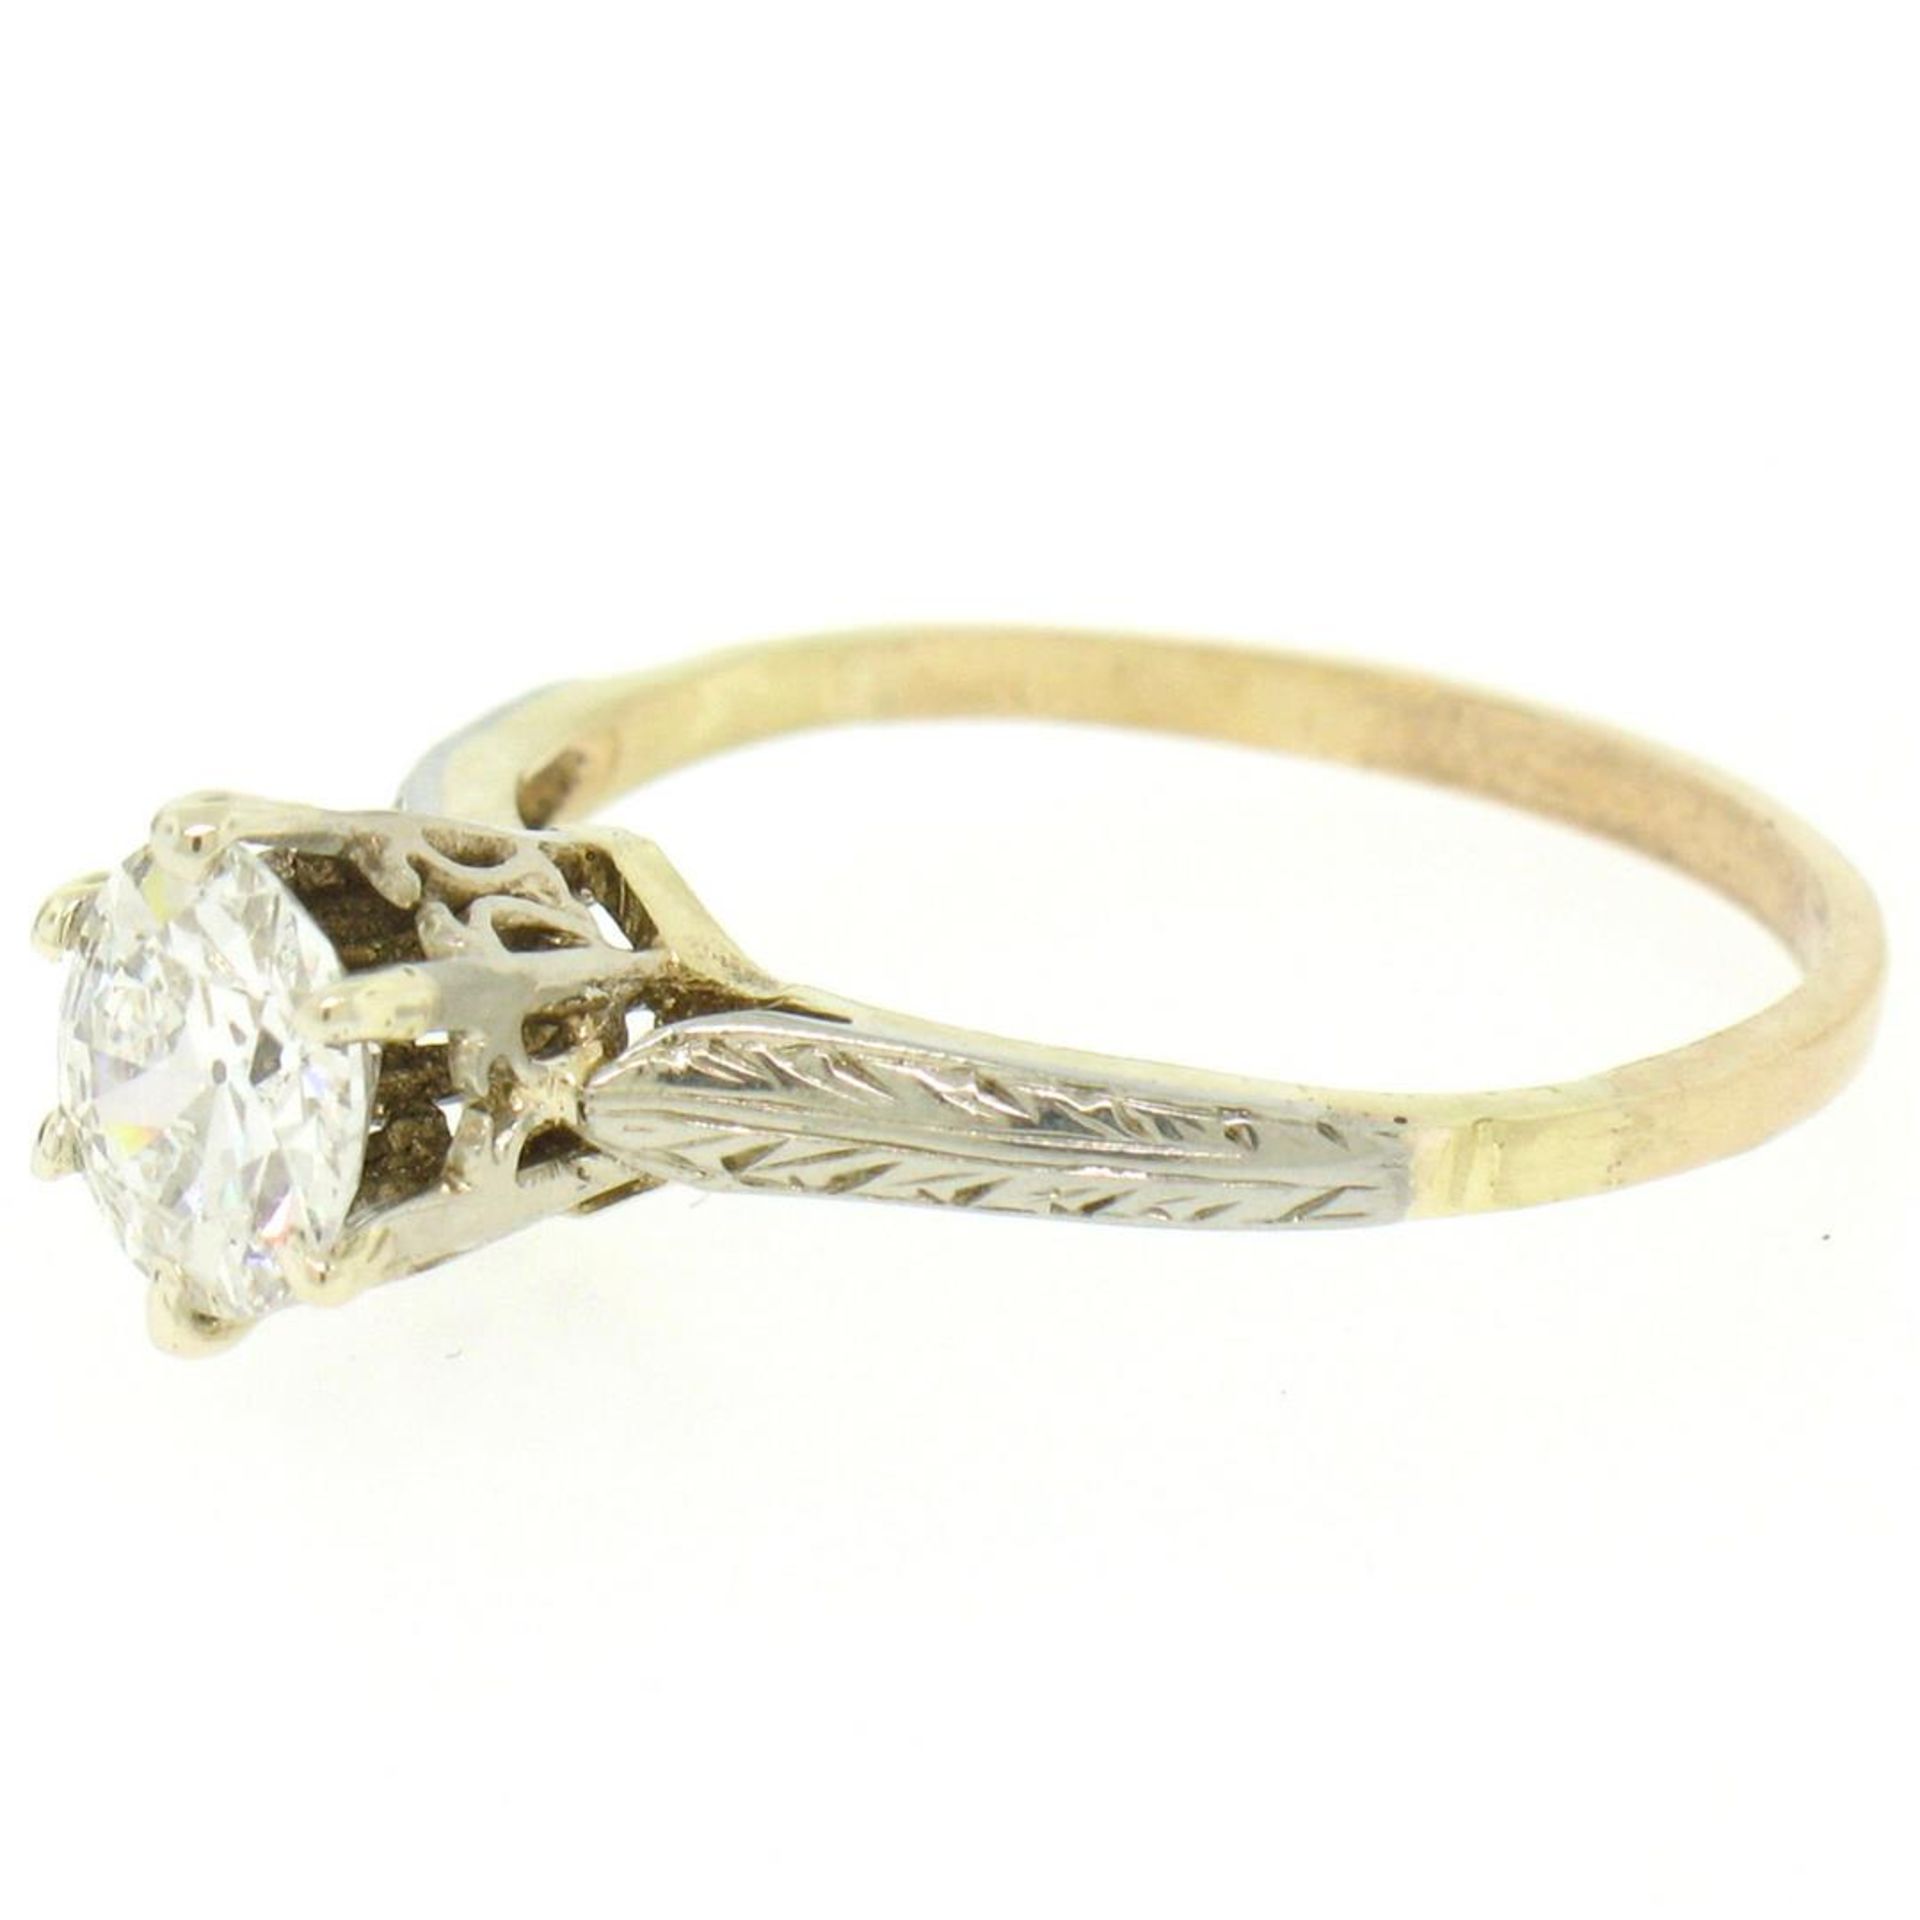 Etched 14k TT Gold .80 ctw European Cut Diamond Solitaire Engagement Ring - Image 5 of 7